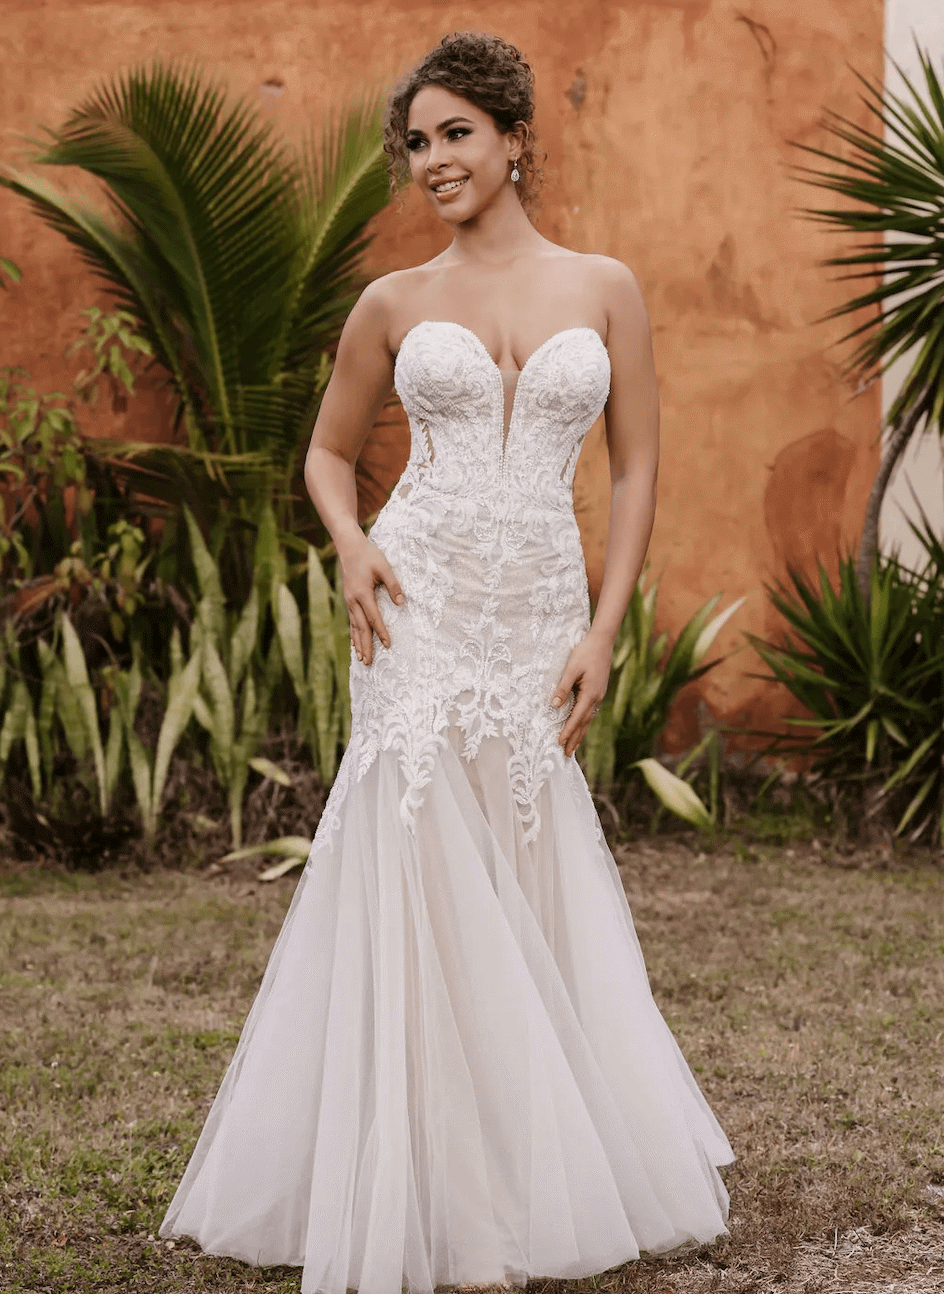 Model wearing a white Allure Gown